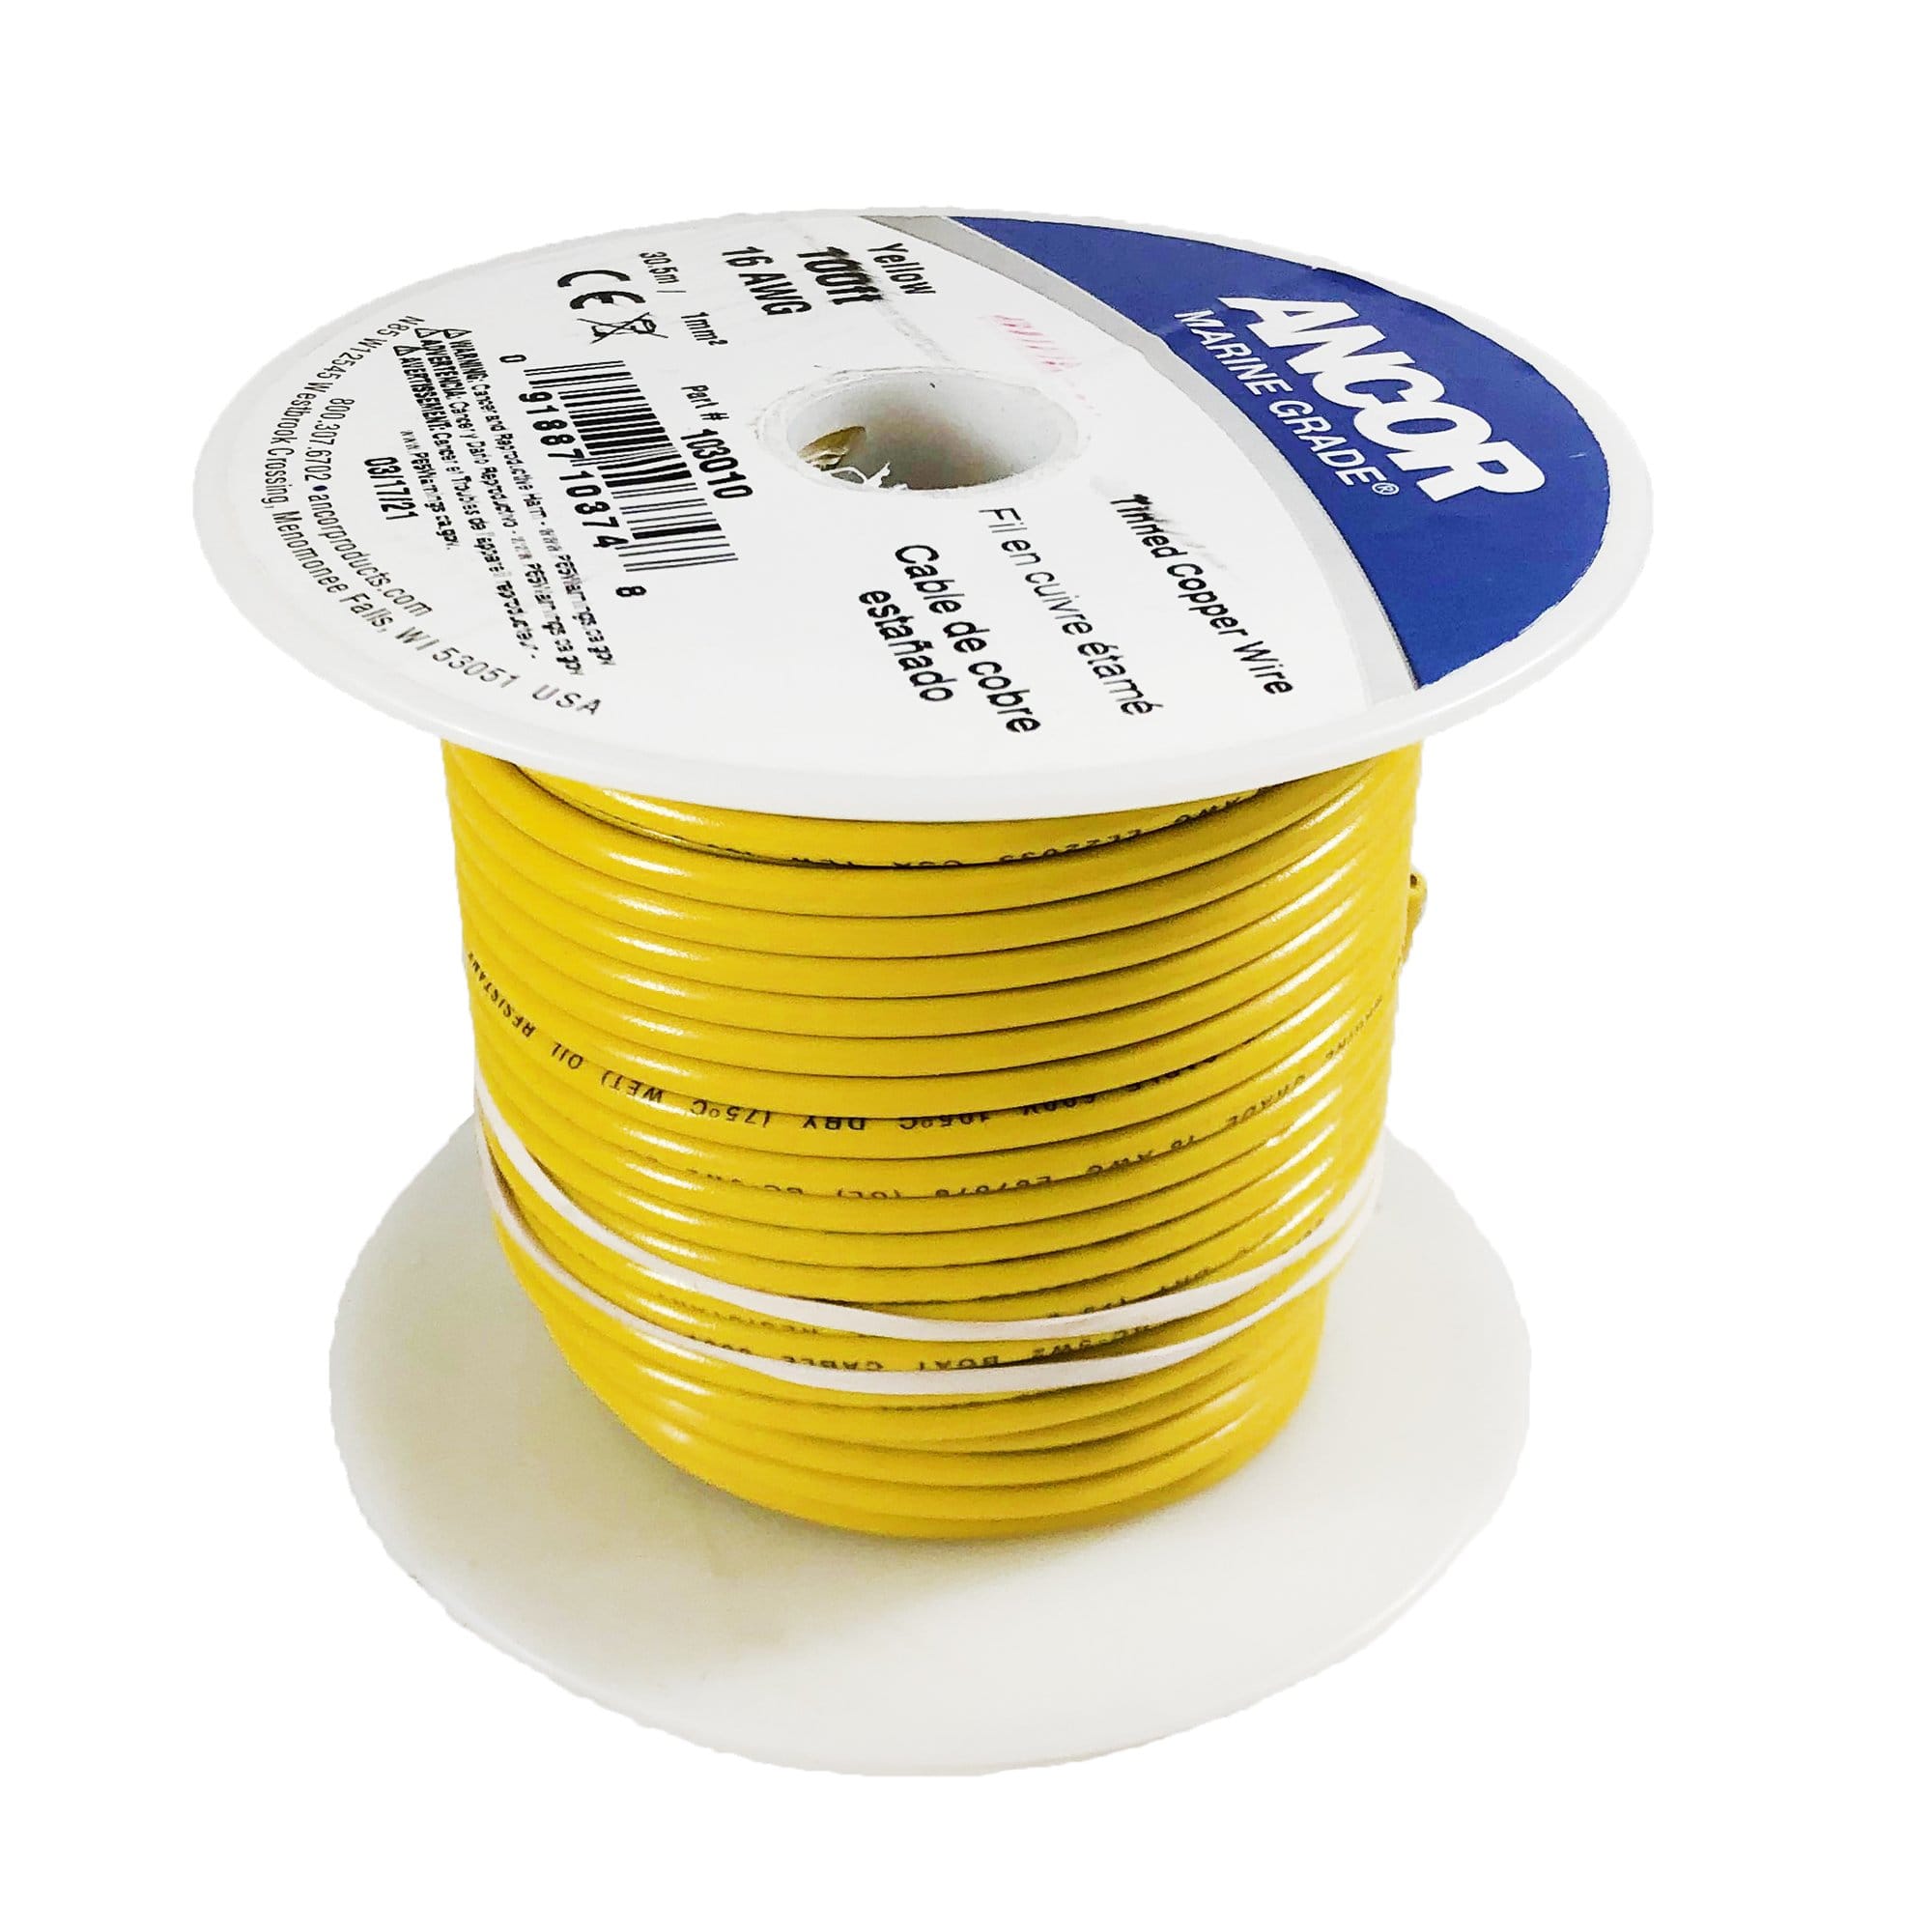 Attwood 14361-5 Insulated 8-Gauge Copper Wire Electrical Equipment 